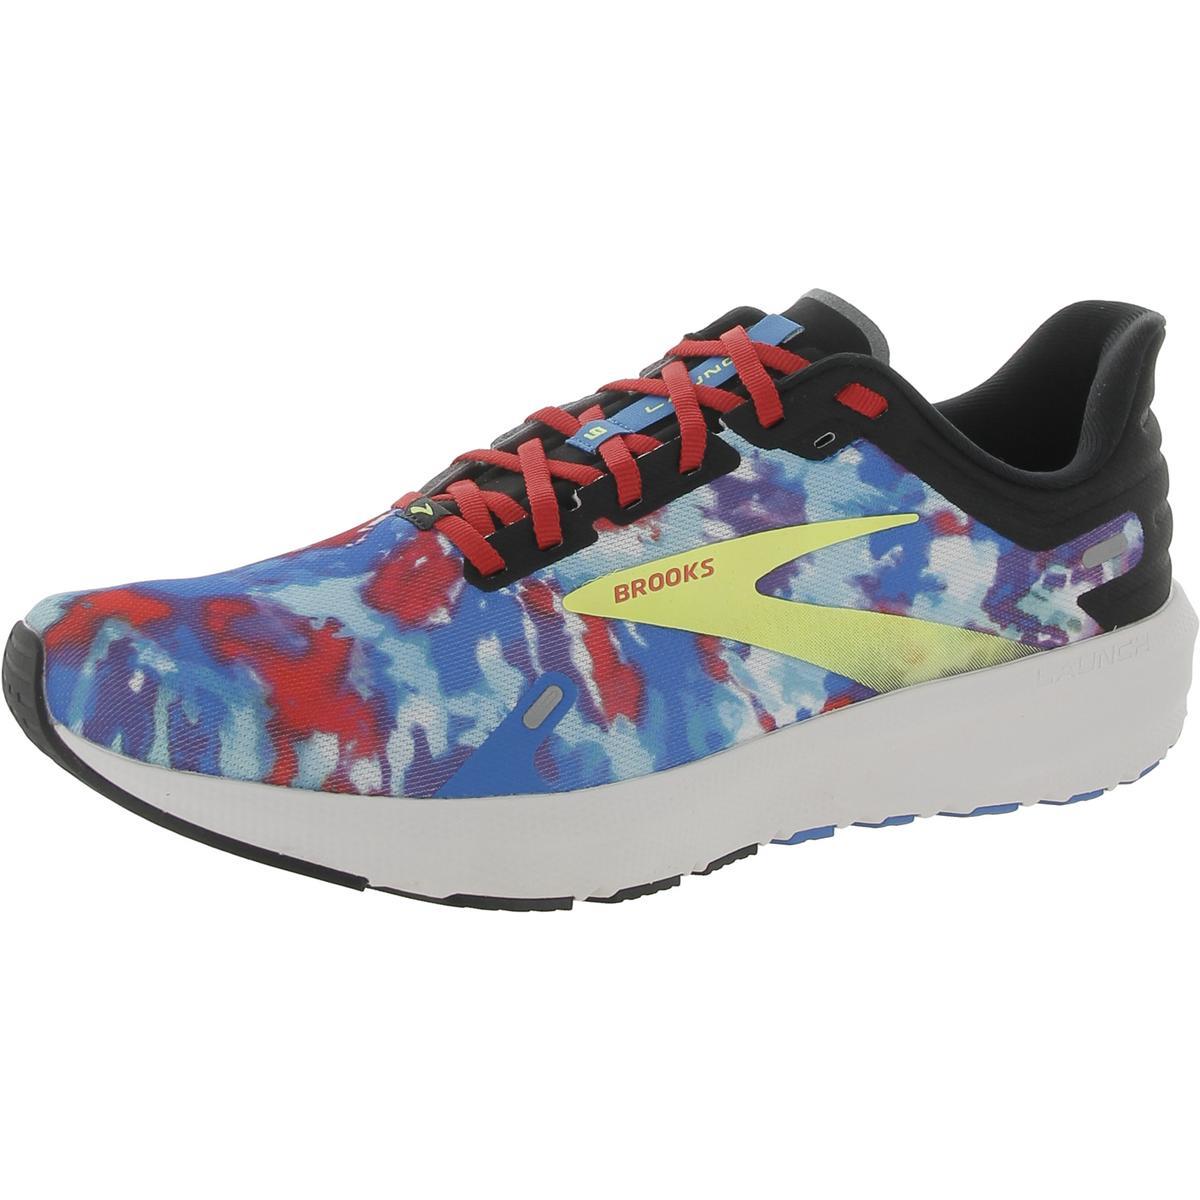 Brooks Mens Launch 9 Trainers Fitness Mesh Running Shoes Sneakers Bhfo 3592 Blue/Red Tie Dye